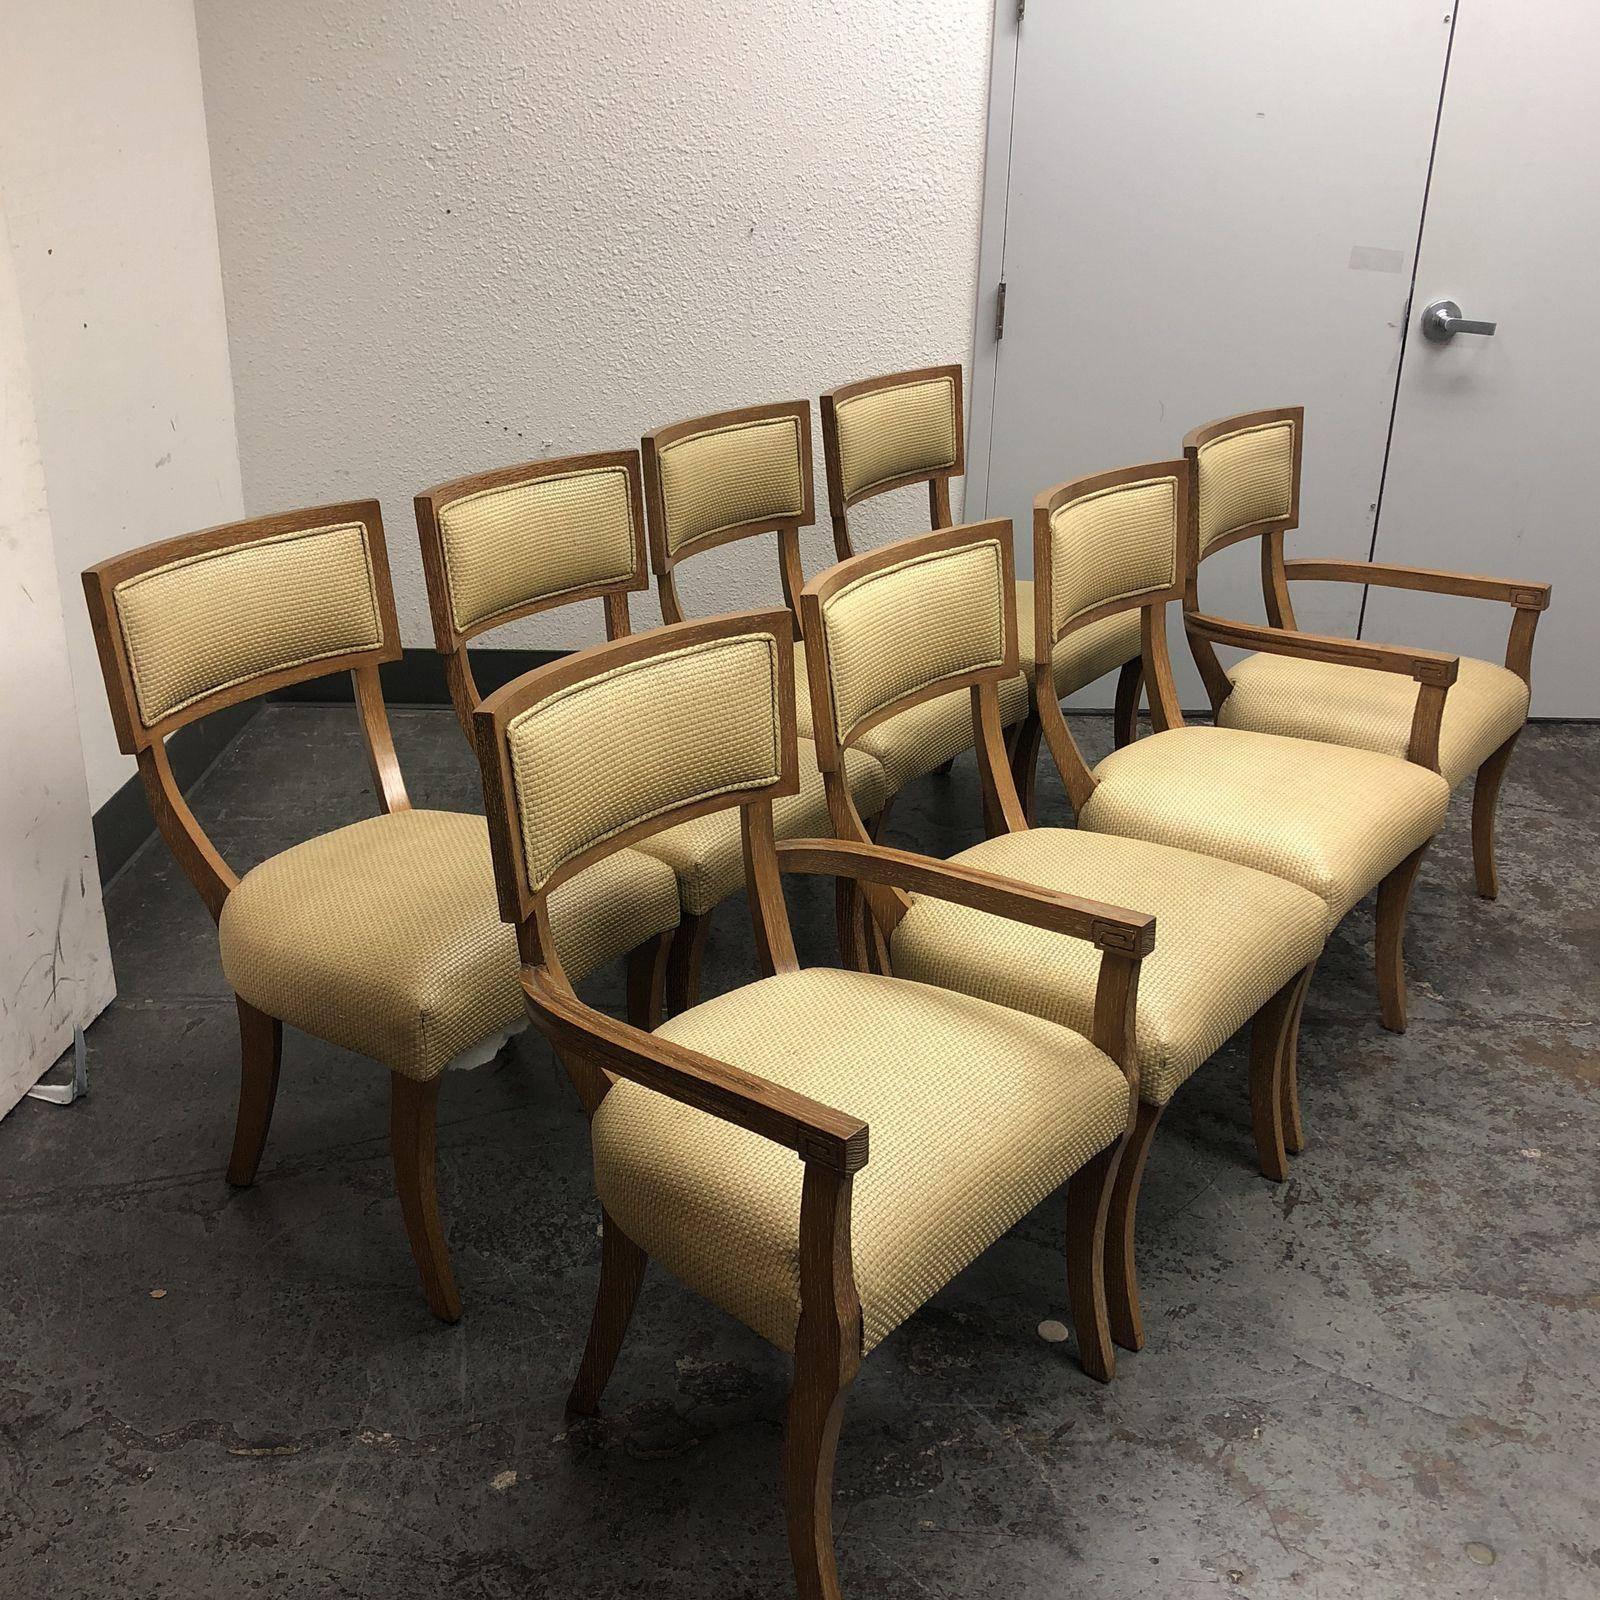 A beautiful set by Michael Berman Limited. Eight gorgeous grand Klismos dining chairs which consist of two with arms and six no armchairs. The upholstery is a woven wheat leather. The wood finish is a cirused oak. 

"Michael Berman limited and